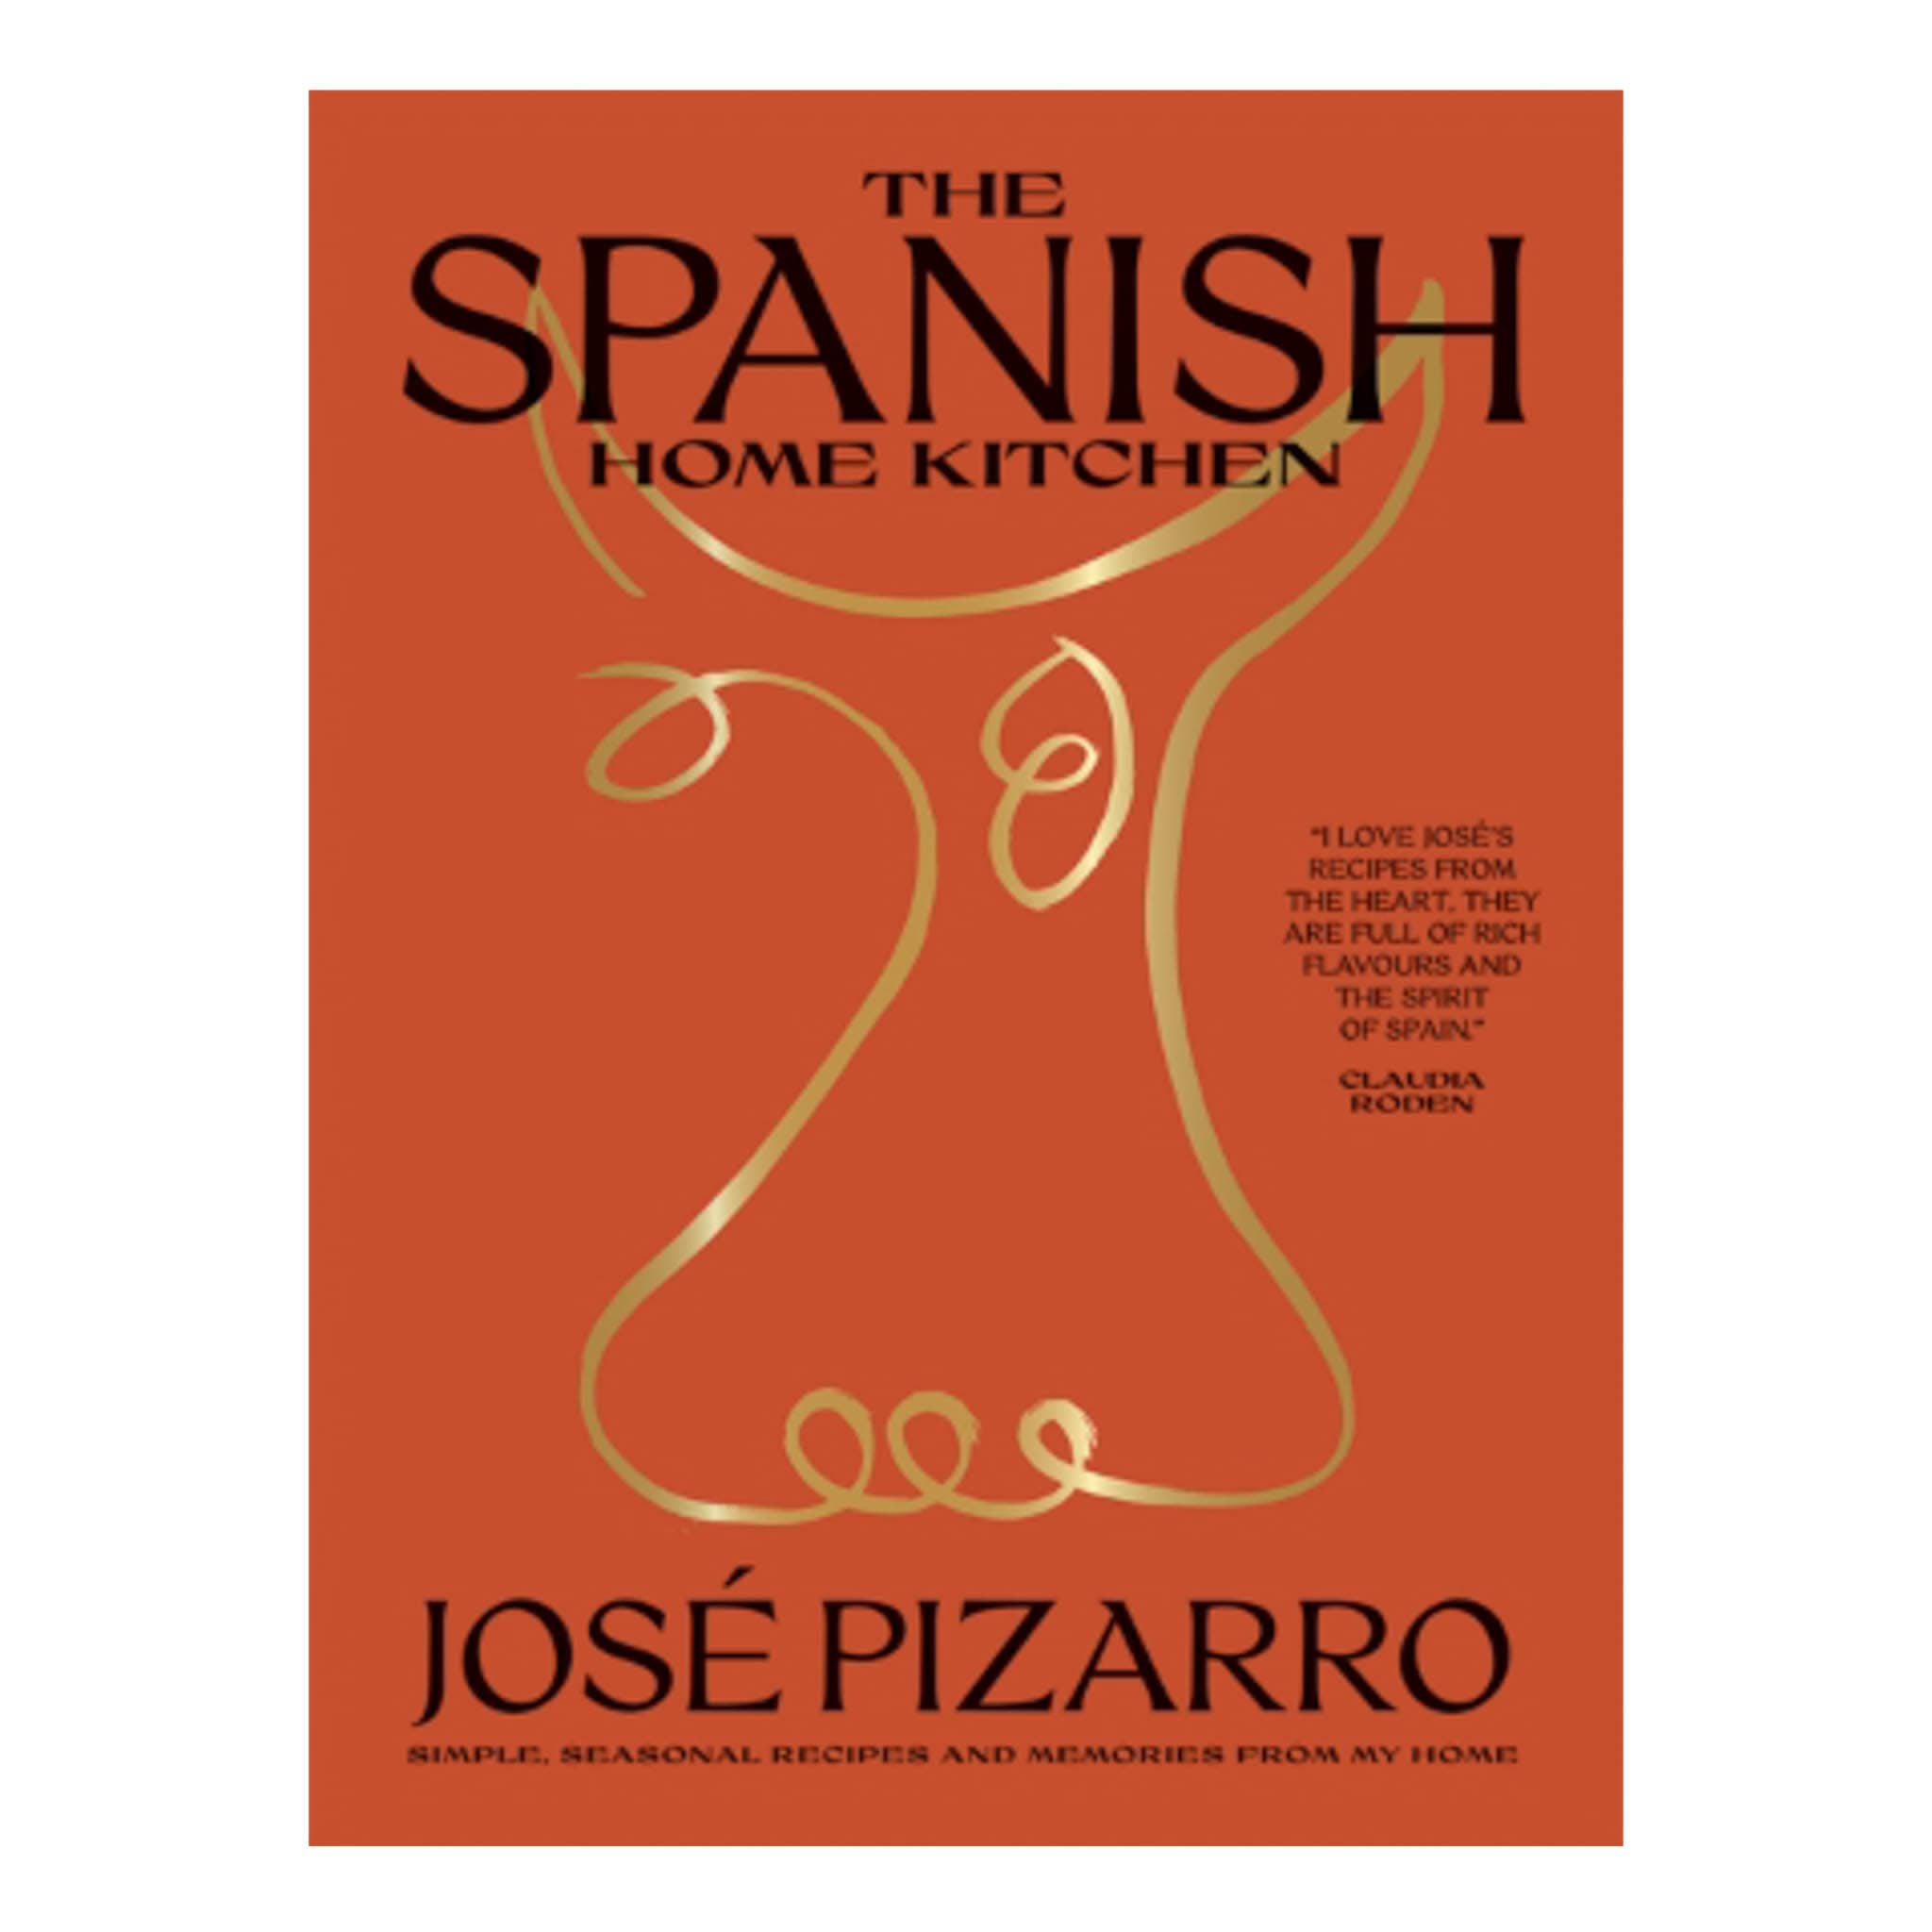 The Spanish Home Kitchen, by Jose Pizarro